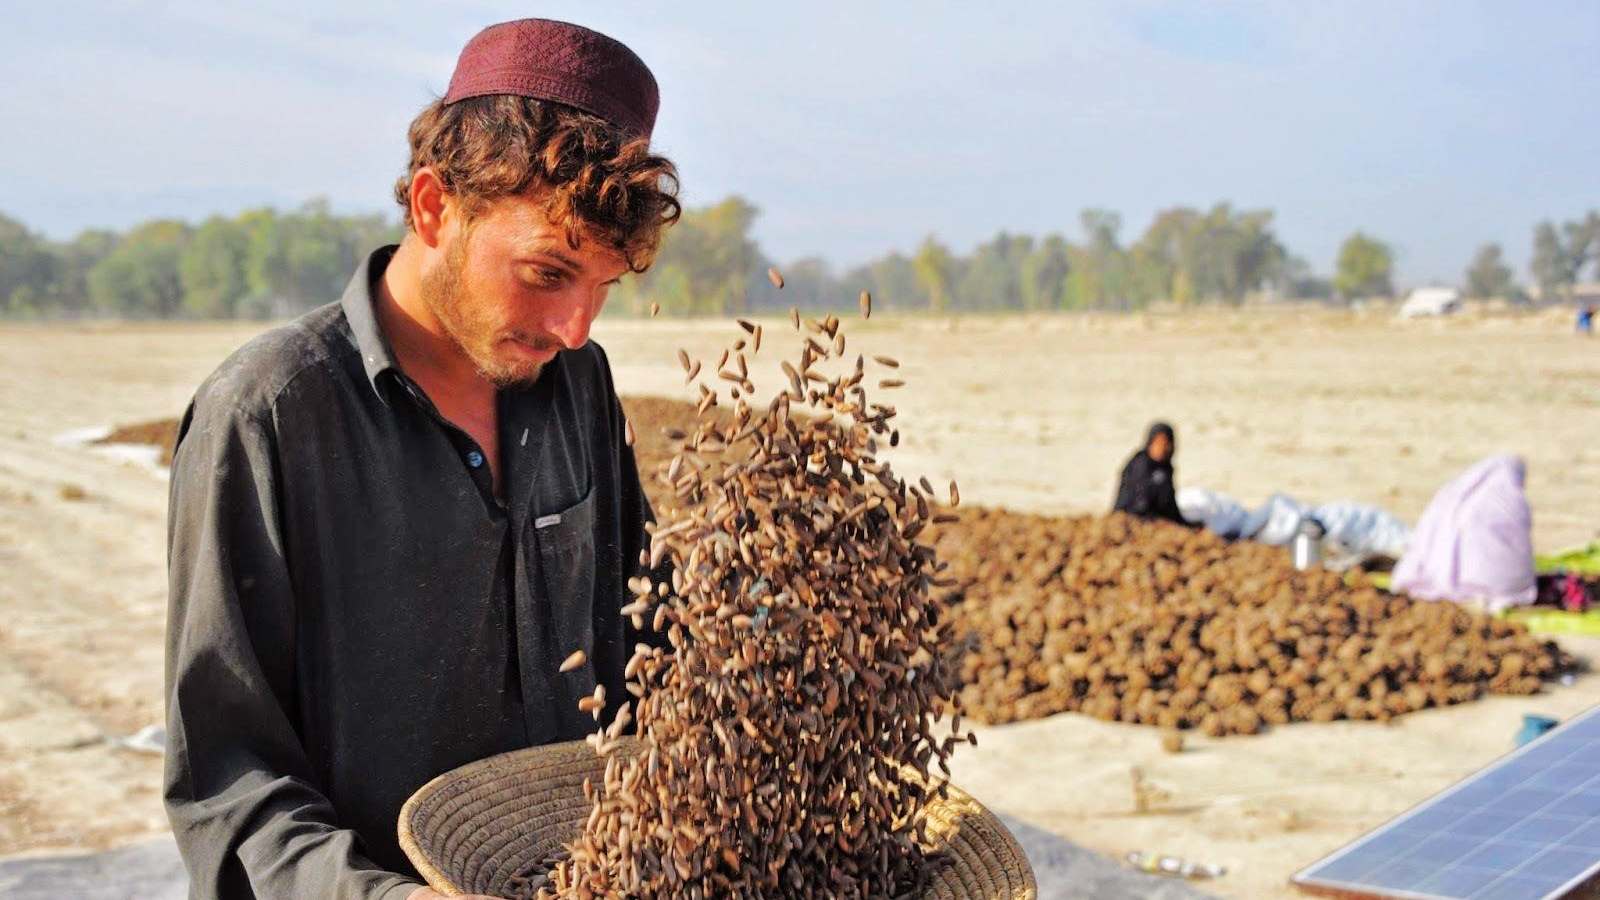 Afghan pine nuts production increases: local media